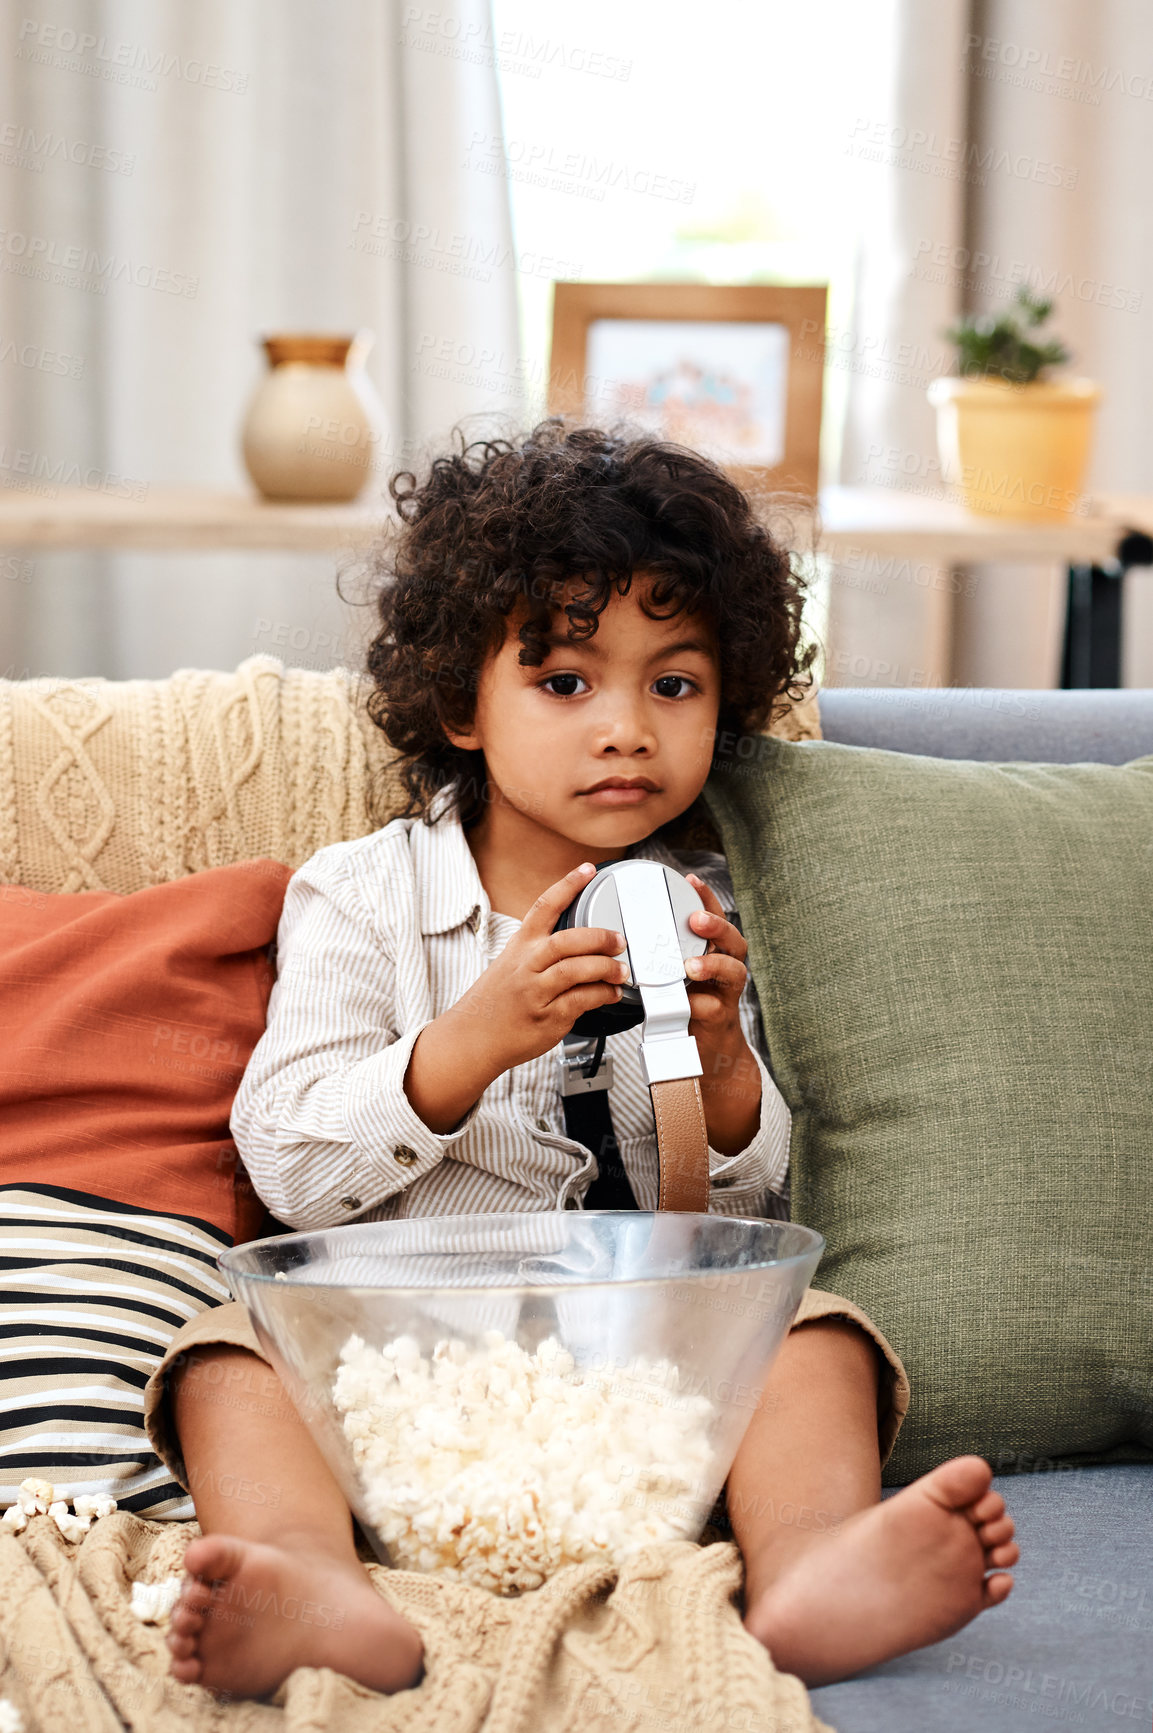 Buy stock photo Full length shot of an adorable little boy eating popcorn and listening to music on headphones at home